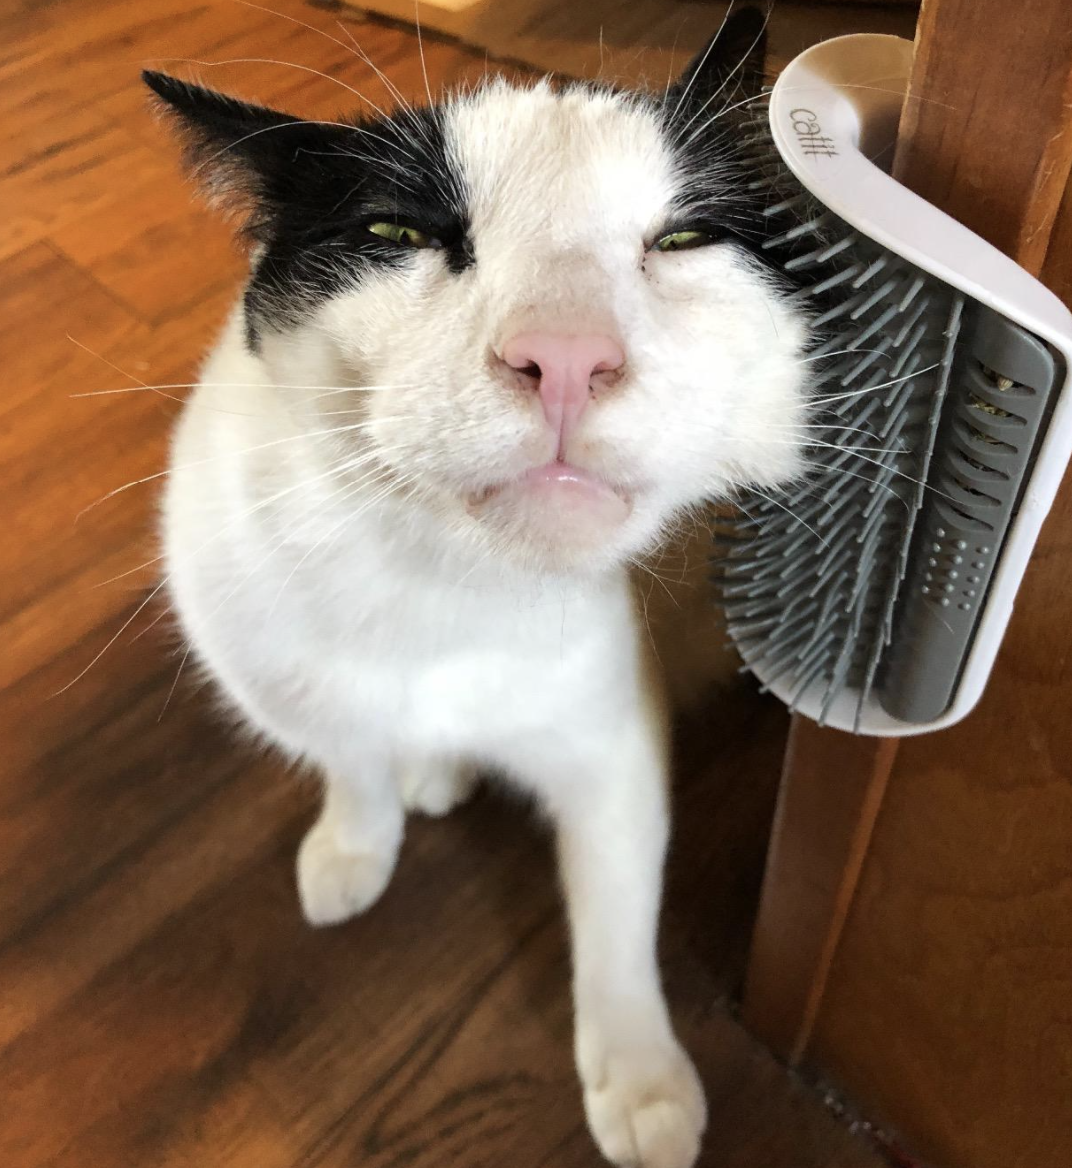 A customer review photo of their cat scratching themselves on the self groomer